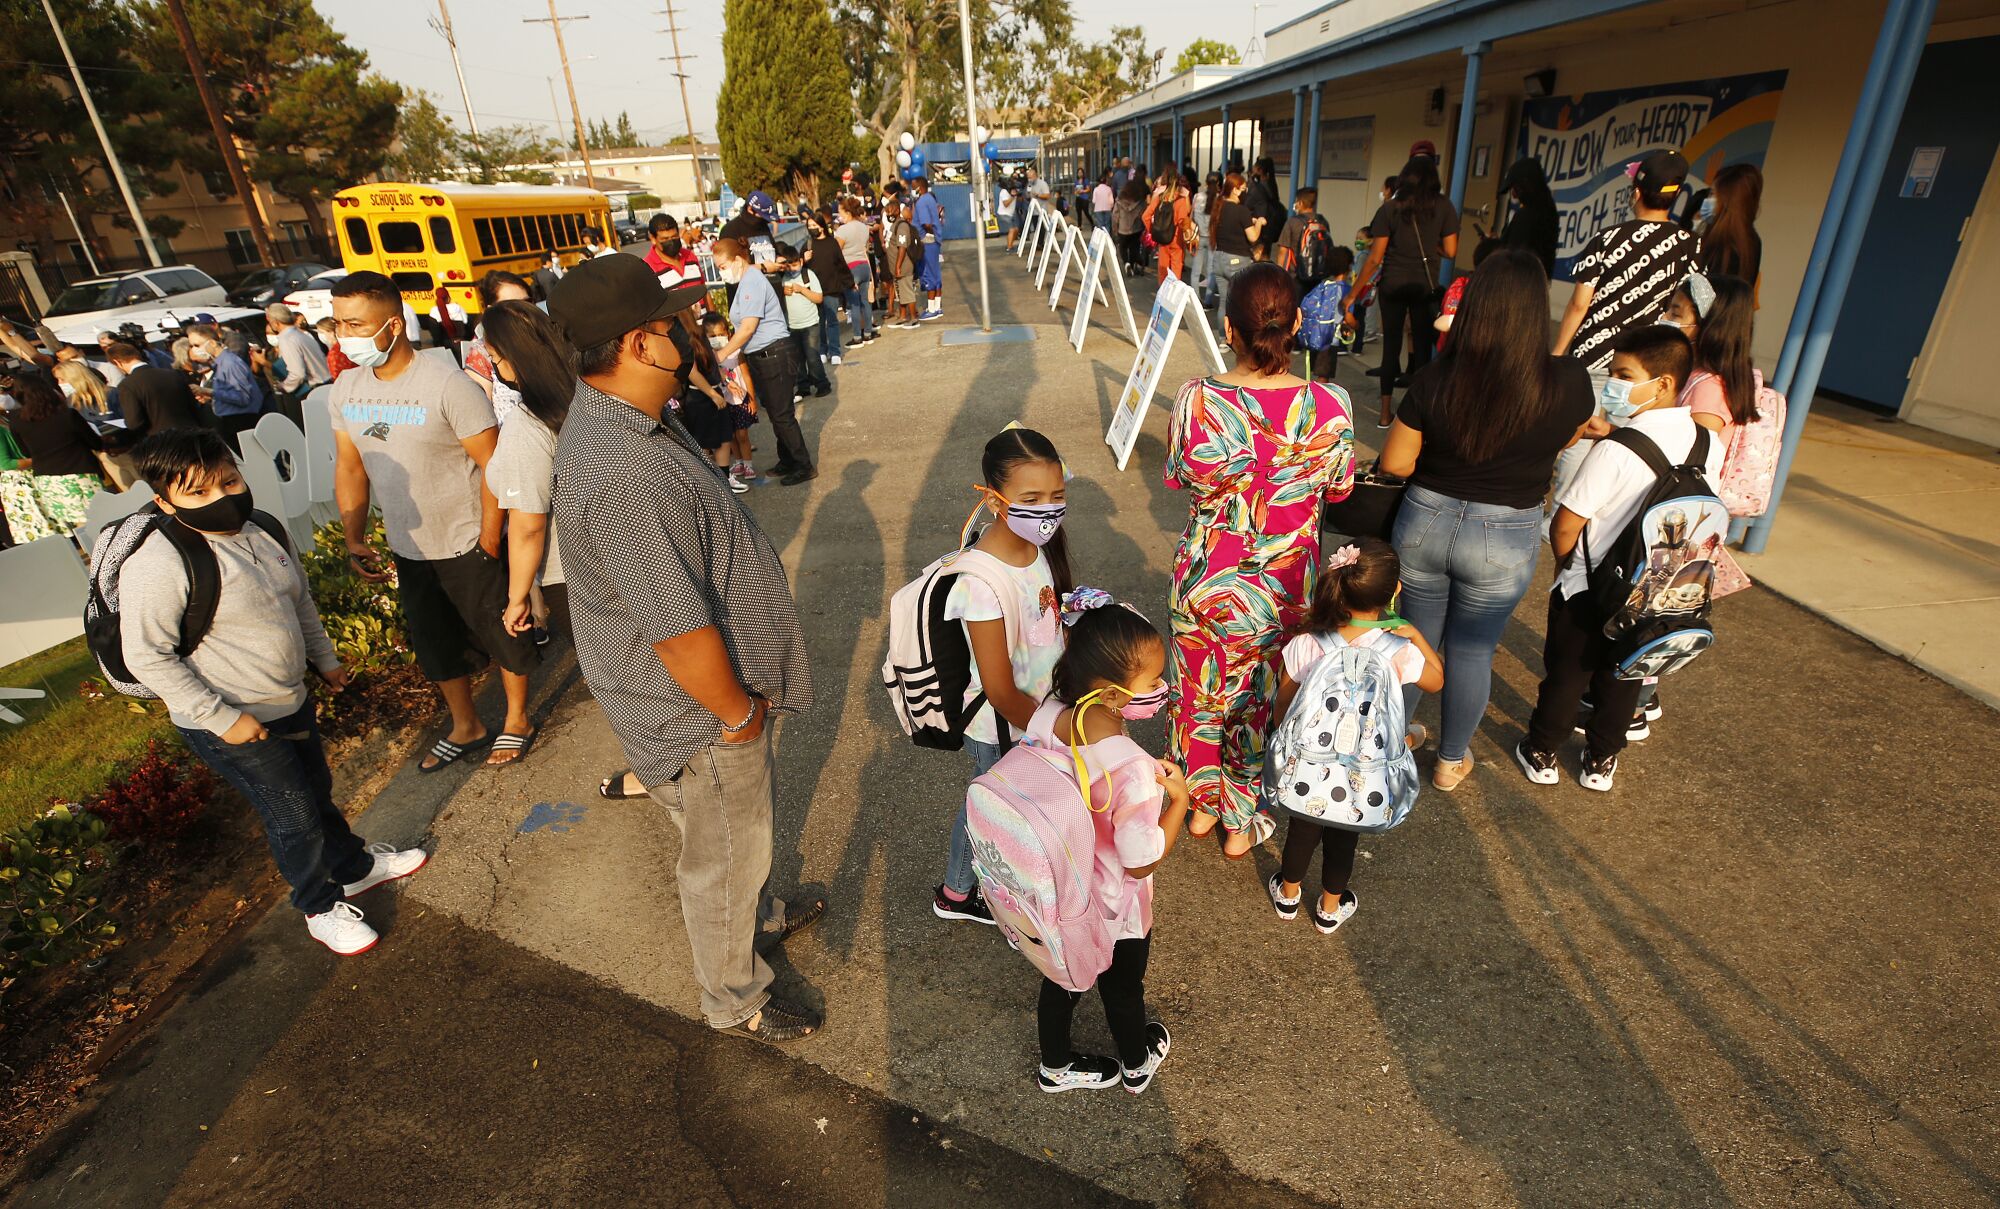 Students and parents wait in line Monday to enter Normont Elementary School